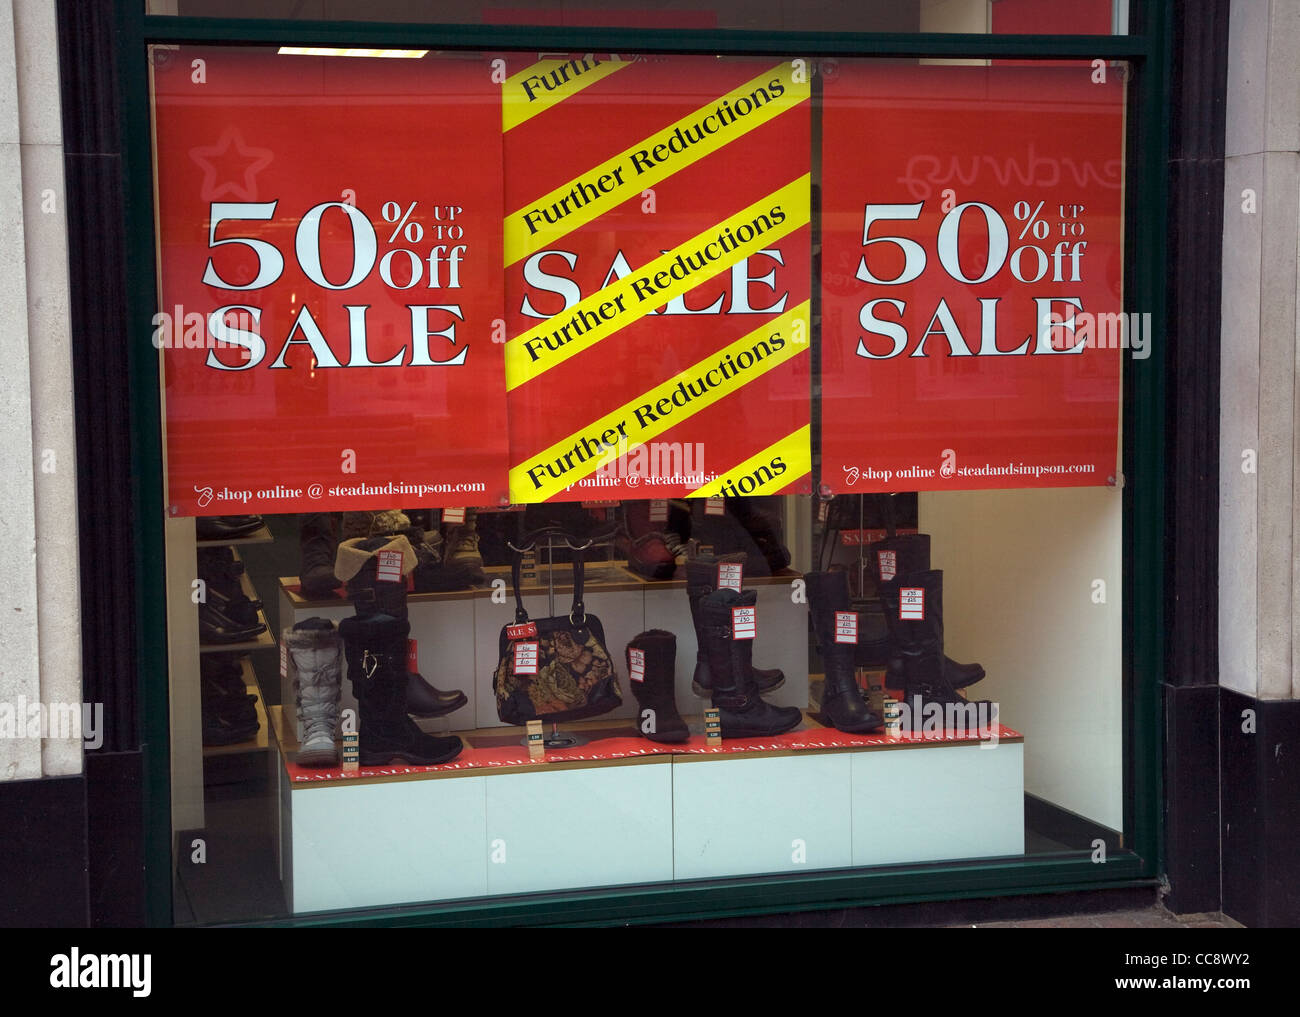 Stead and Simpson shoe shop January sales Stock Photo